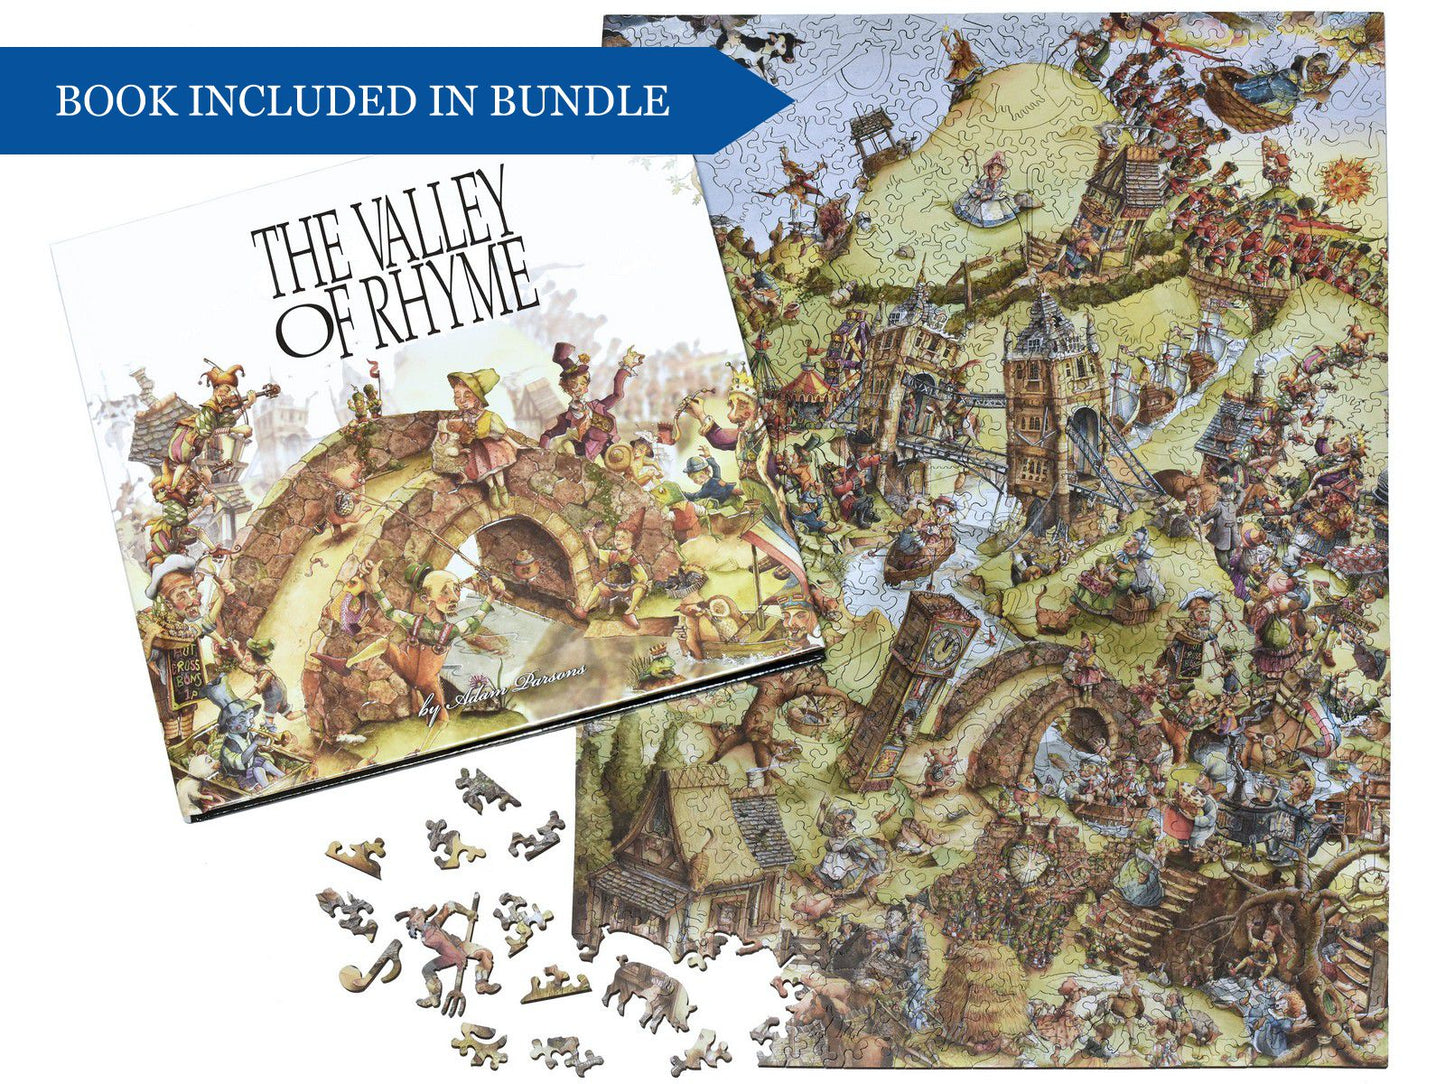 The puzzle, The Valley of Rhyme, with the book that it comes with in a bundle.